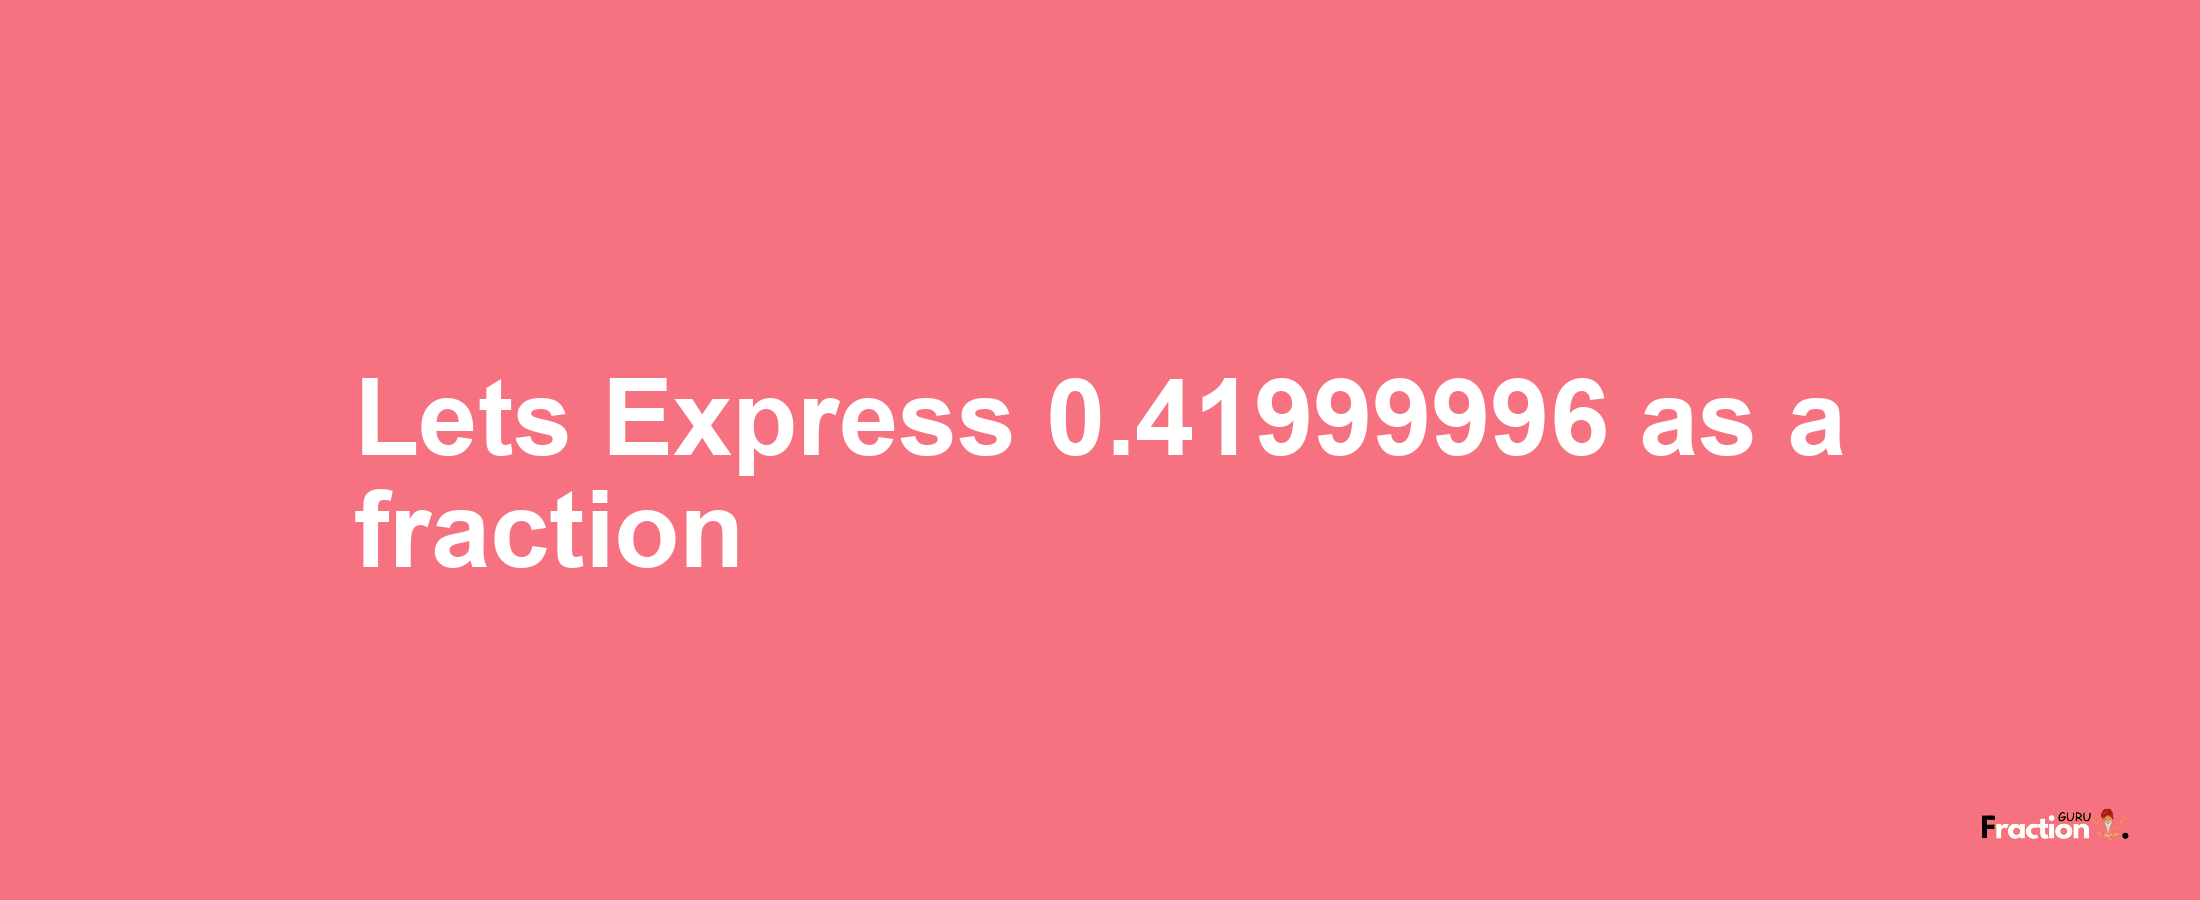 Lets Express 0.41999996 as afraction